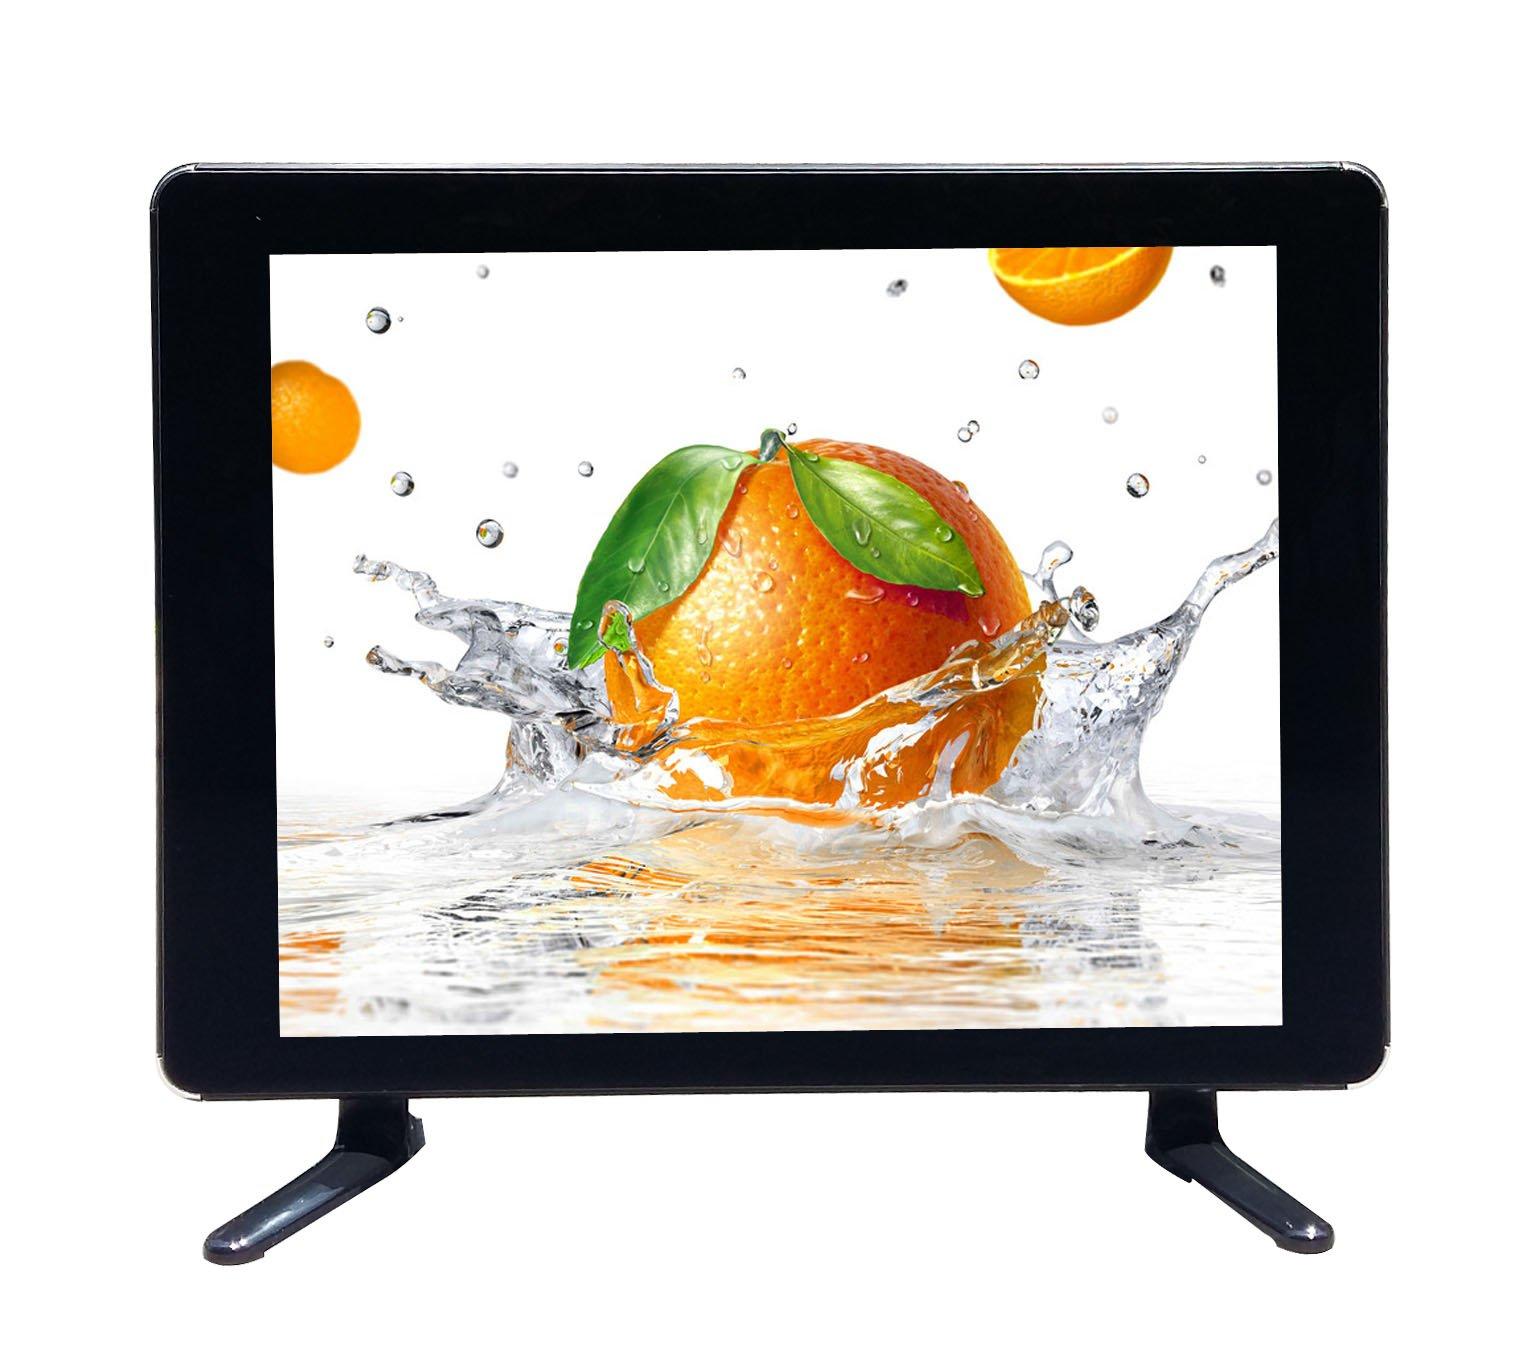 Xinyao LCD at discount 17 in lcd tv new style for lcd tv screen